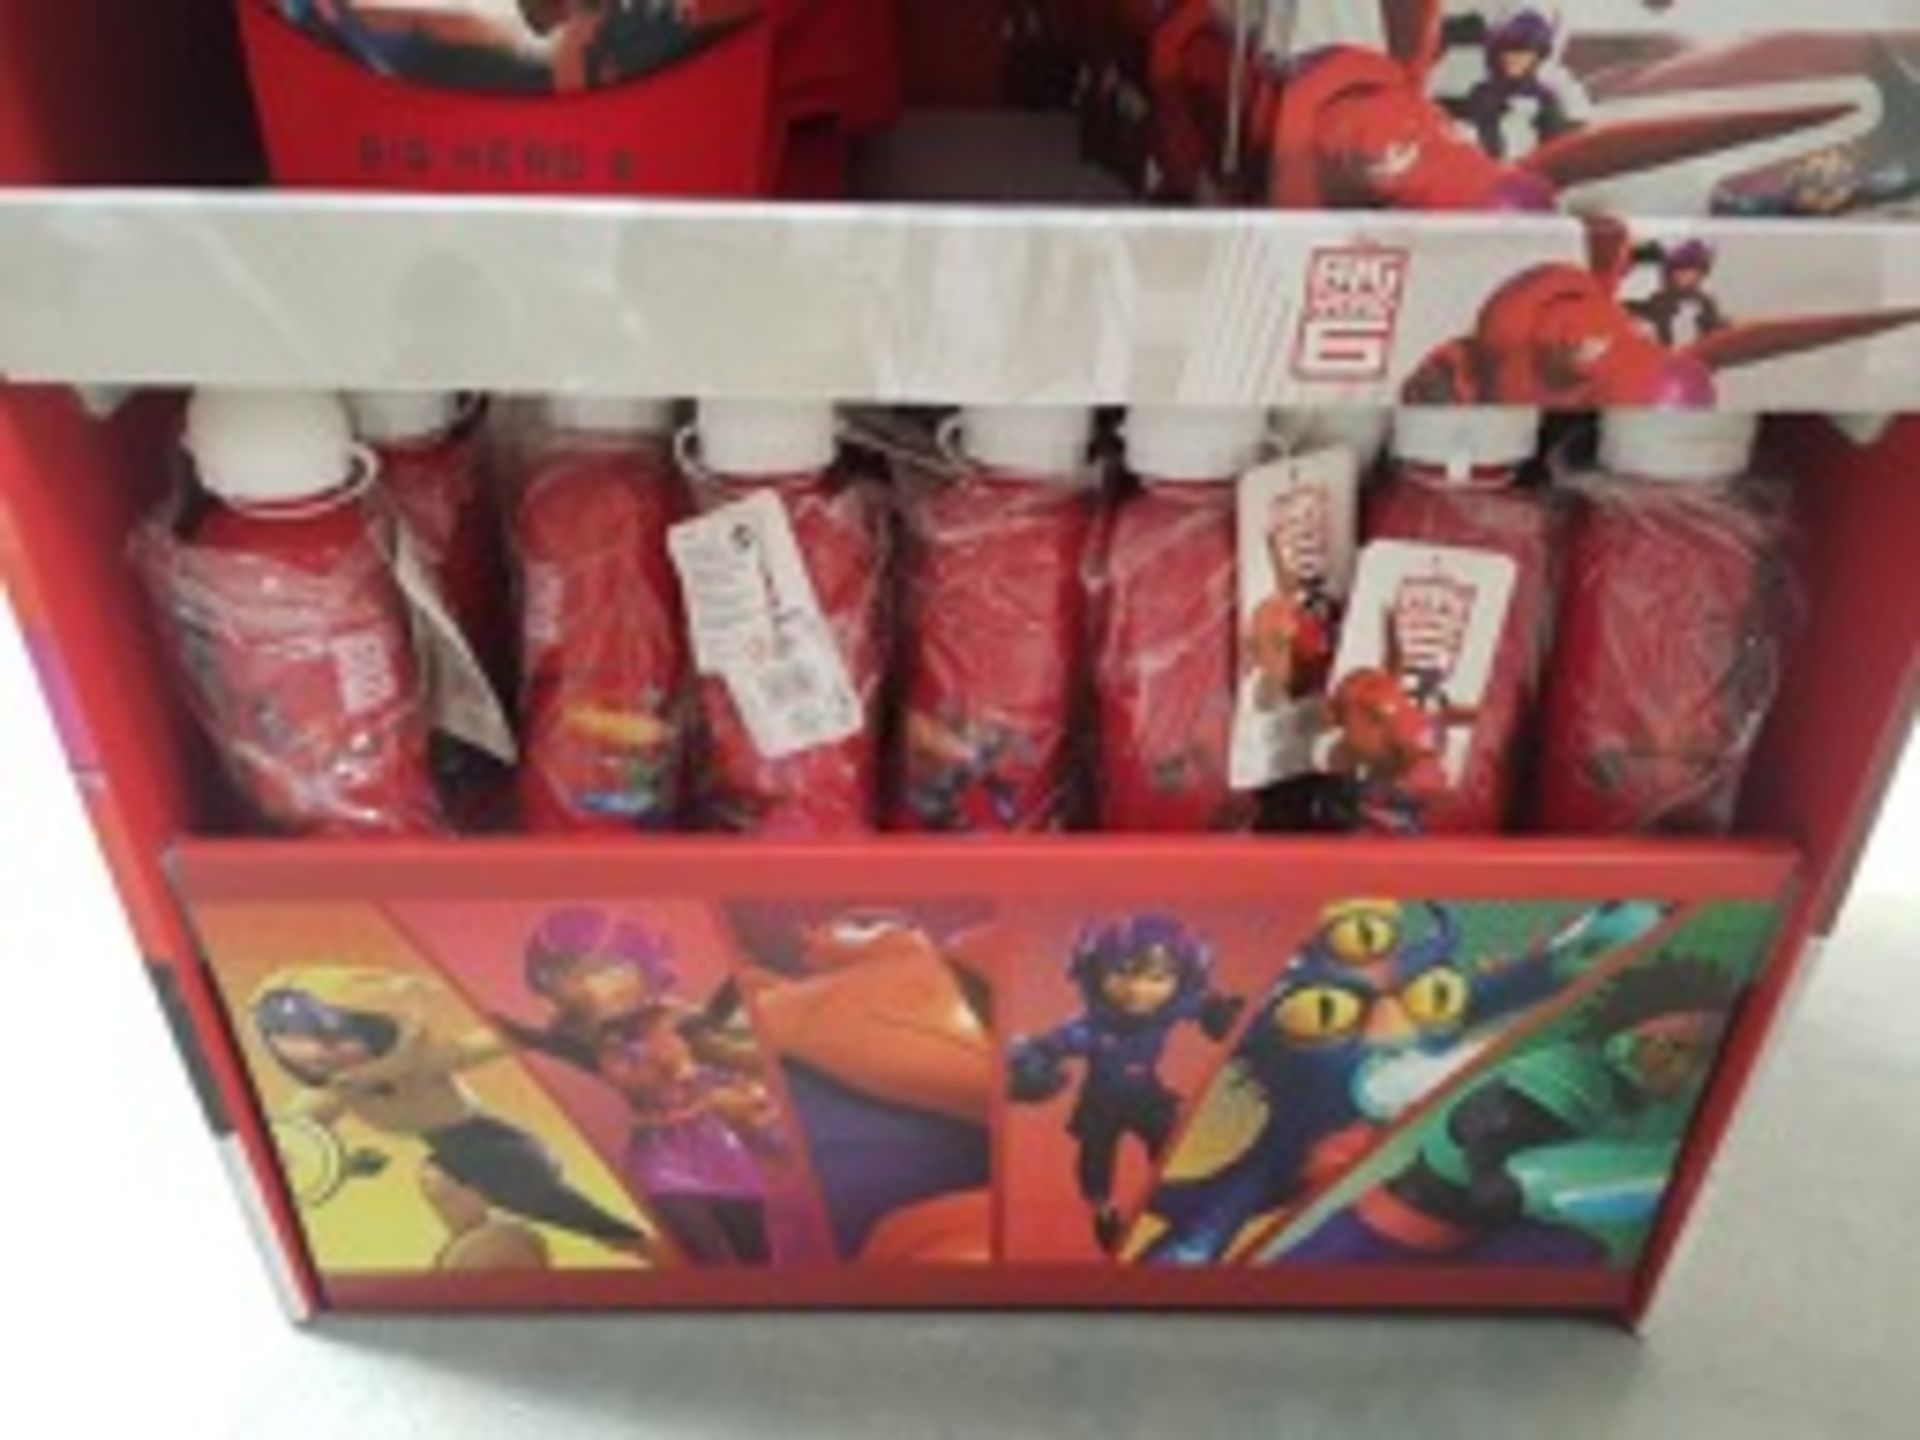 1 x Brand New Big Hero 6 - 328 piece Full Shop Display Unit. Contains: 36 Sticker Sets, 16 - Image 5 of 7